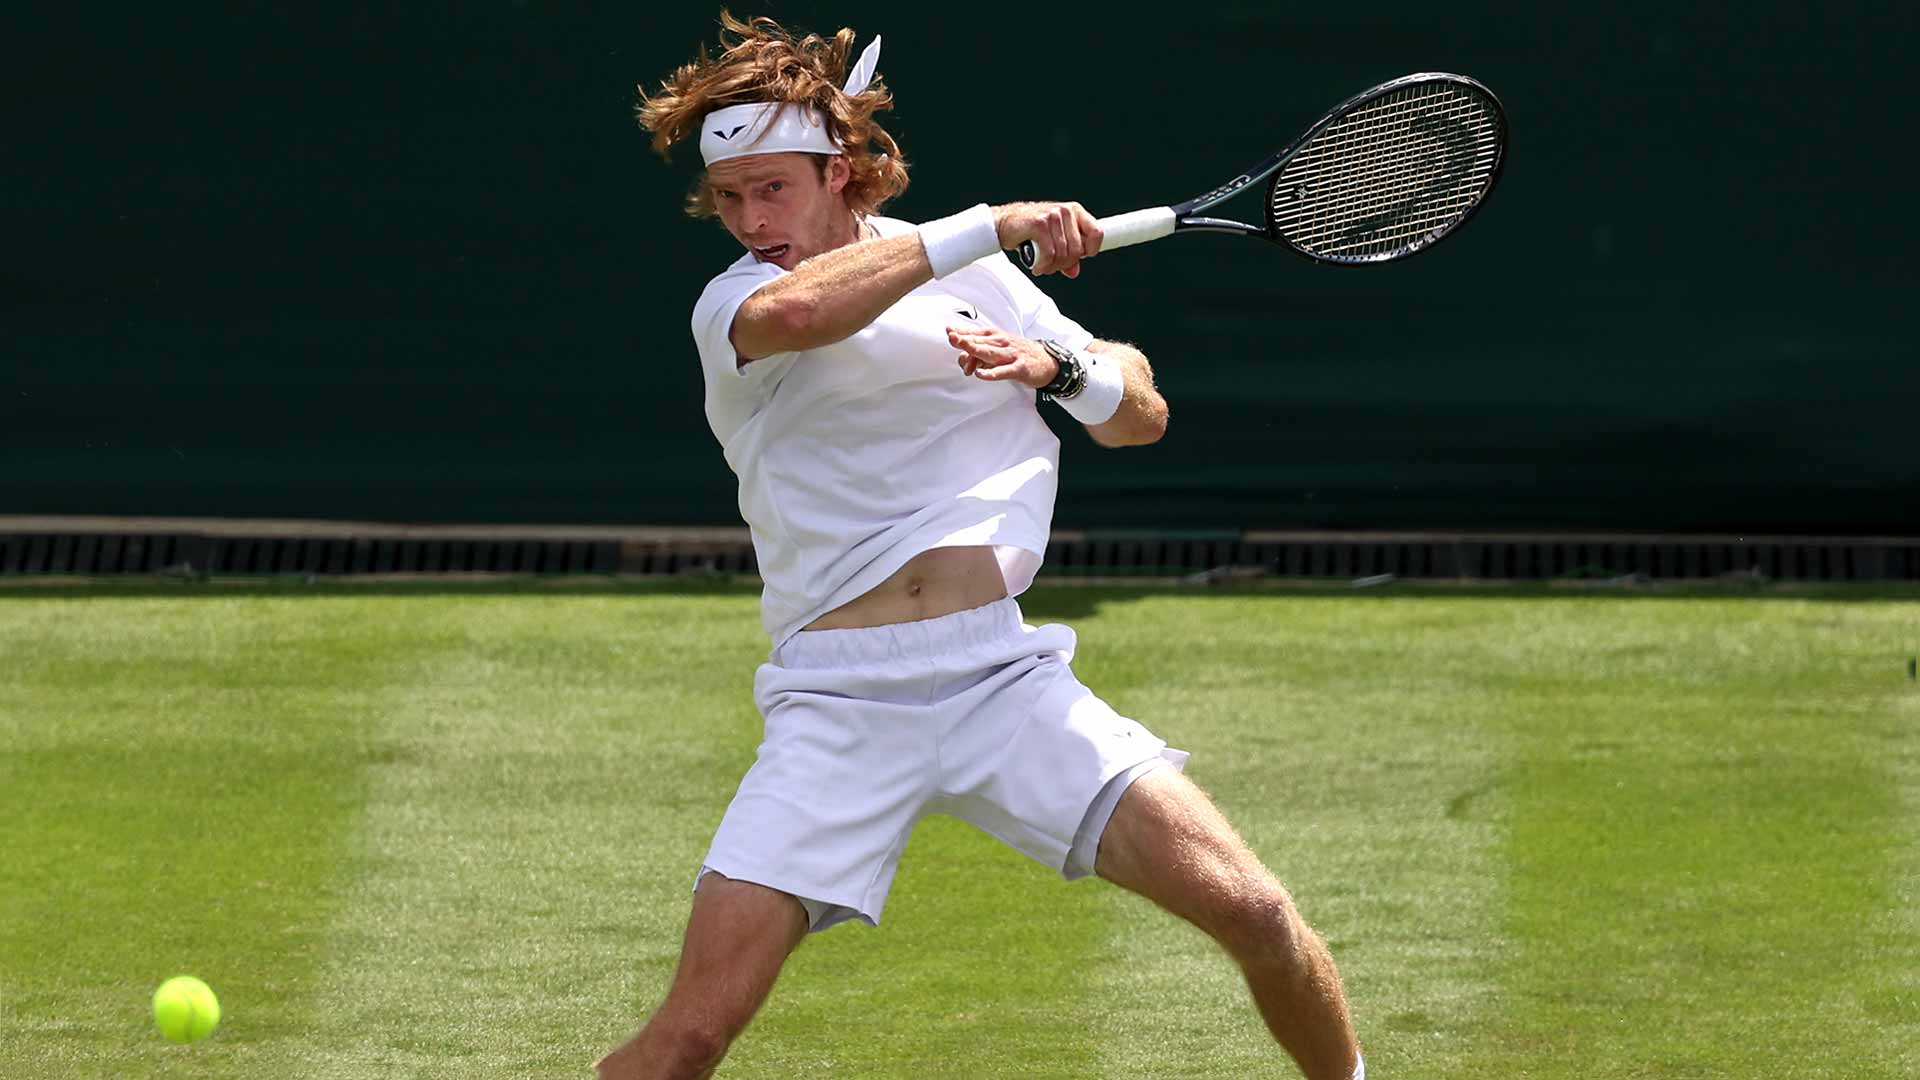 Andrey Rublev hits 34 winners en route to second-round victory against Aslan Karatsev on Thursday at Wimbledon.